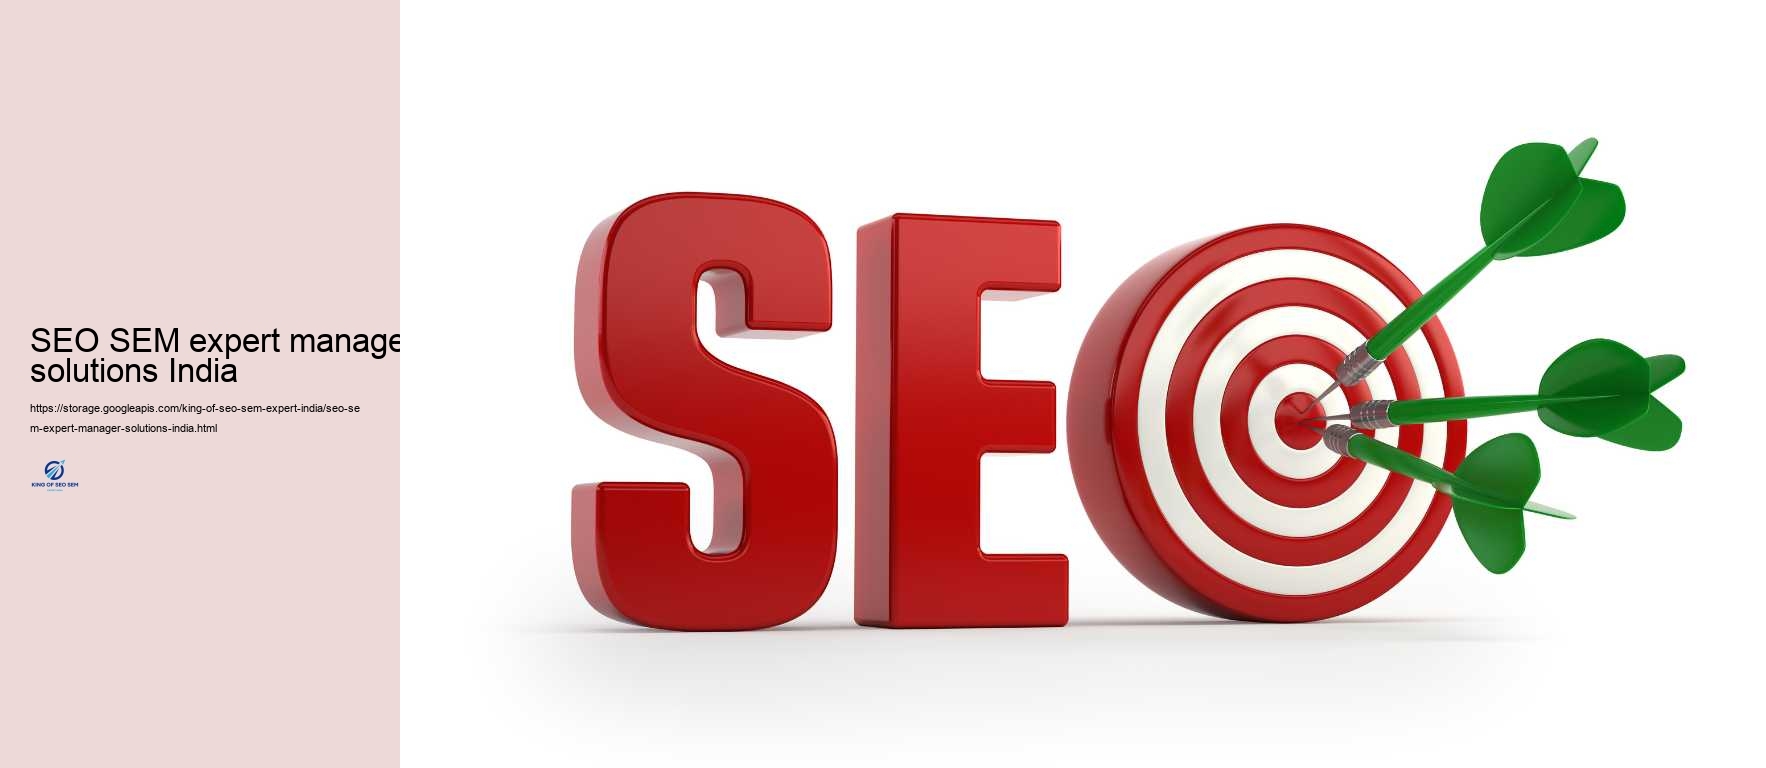 SEO SEM expert manager solutions India